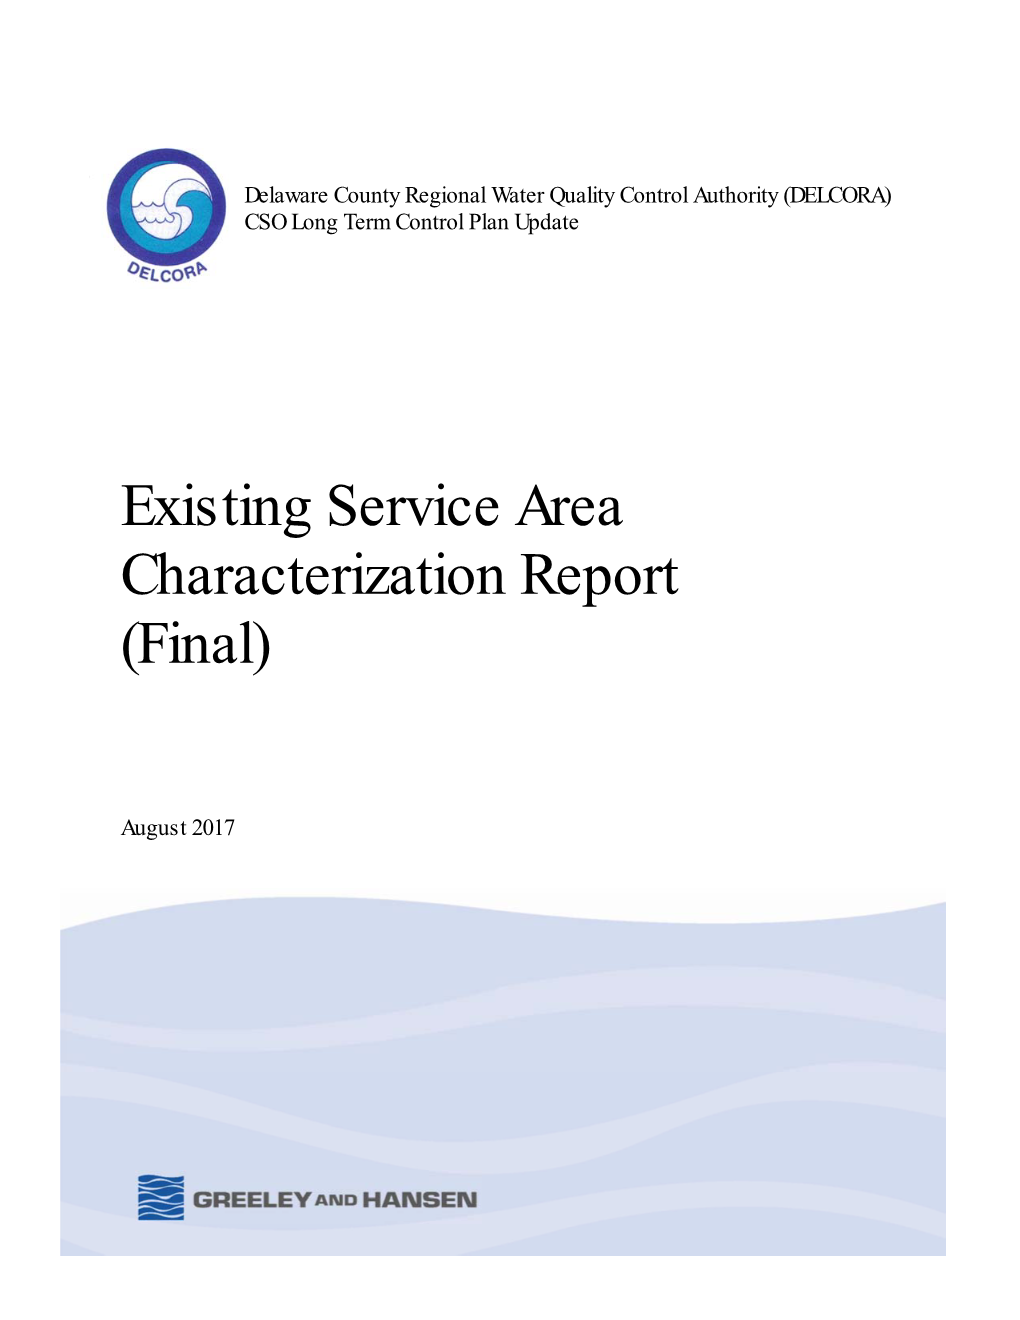 Existing Service Area Characterization Report (Final)